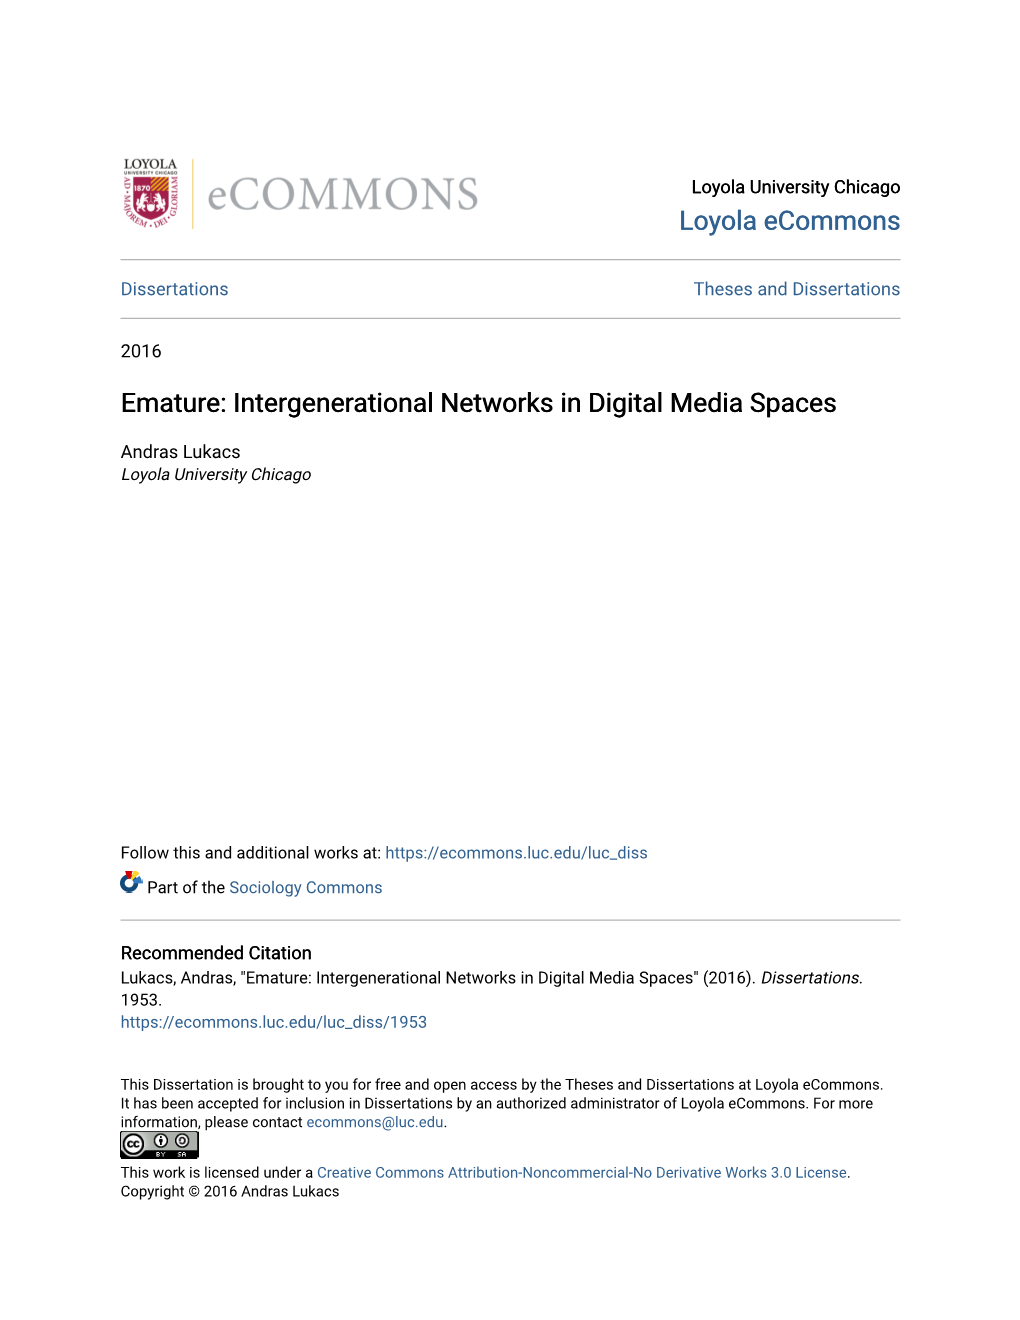 Emature: Intergenerational Networks in Digital Media Spaces